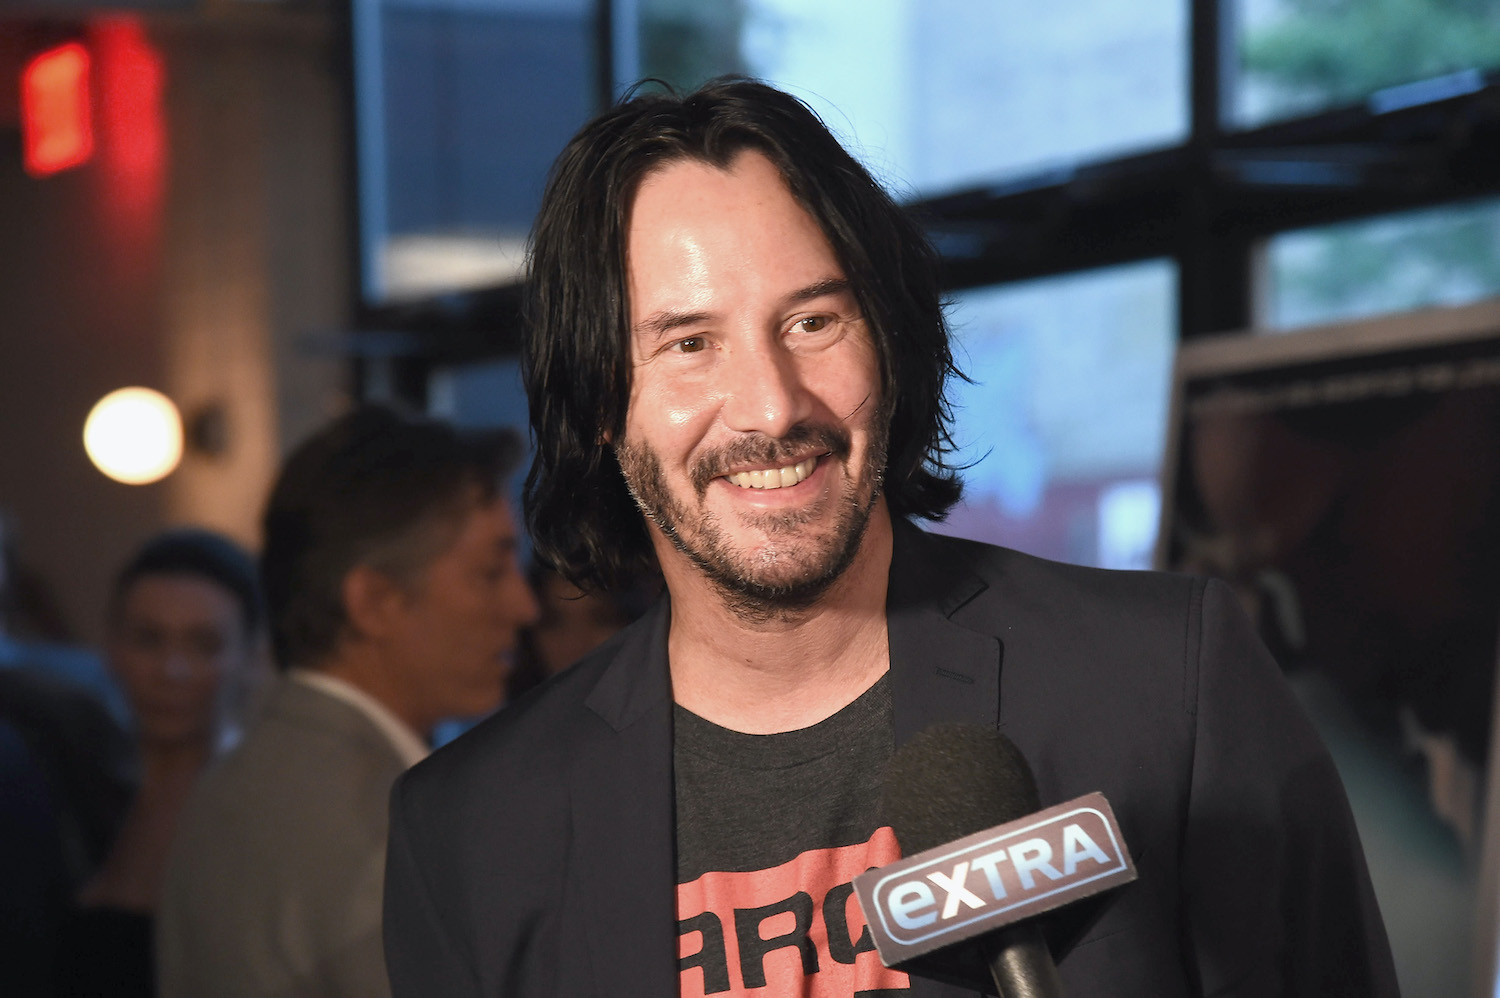 Keanu Reeves smiles while he attends the 'Siberia' New York premiere in 2018